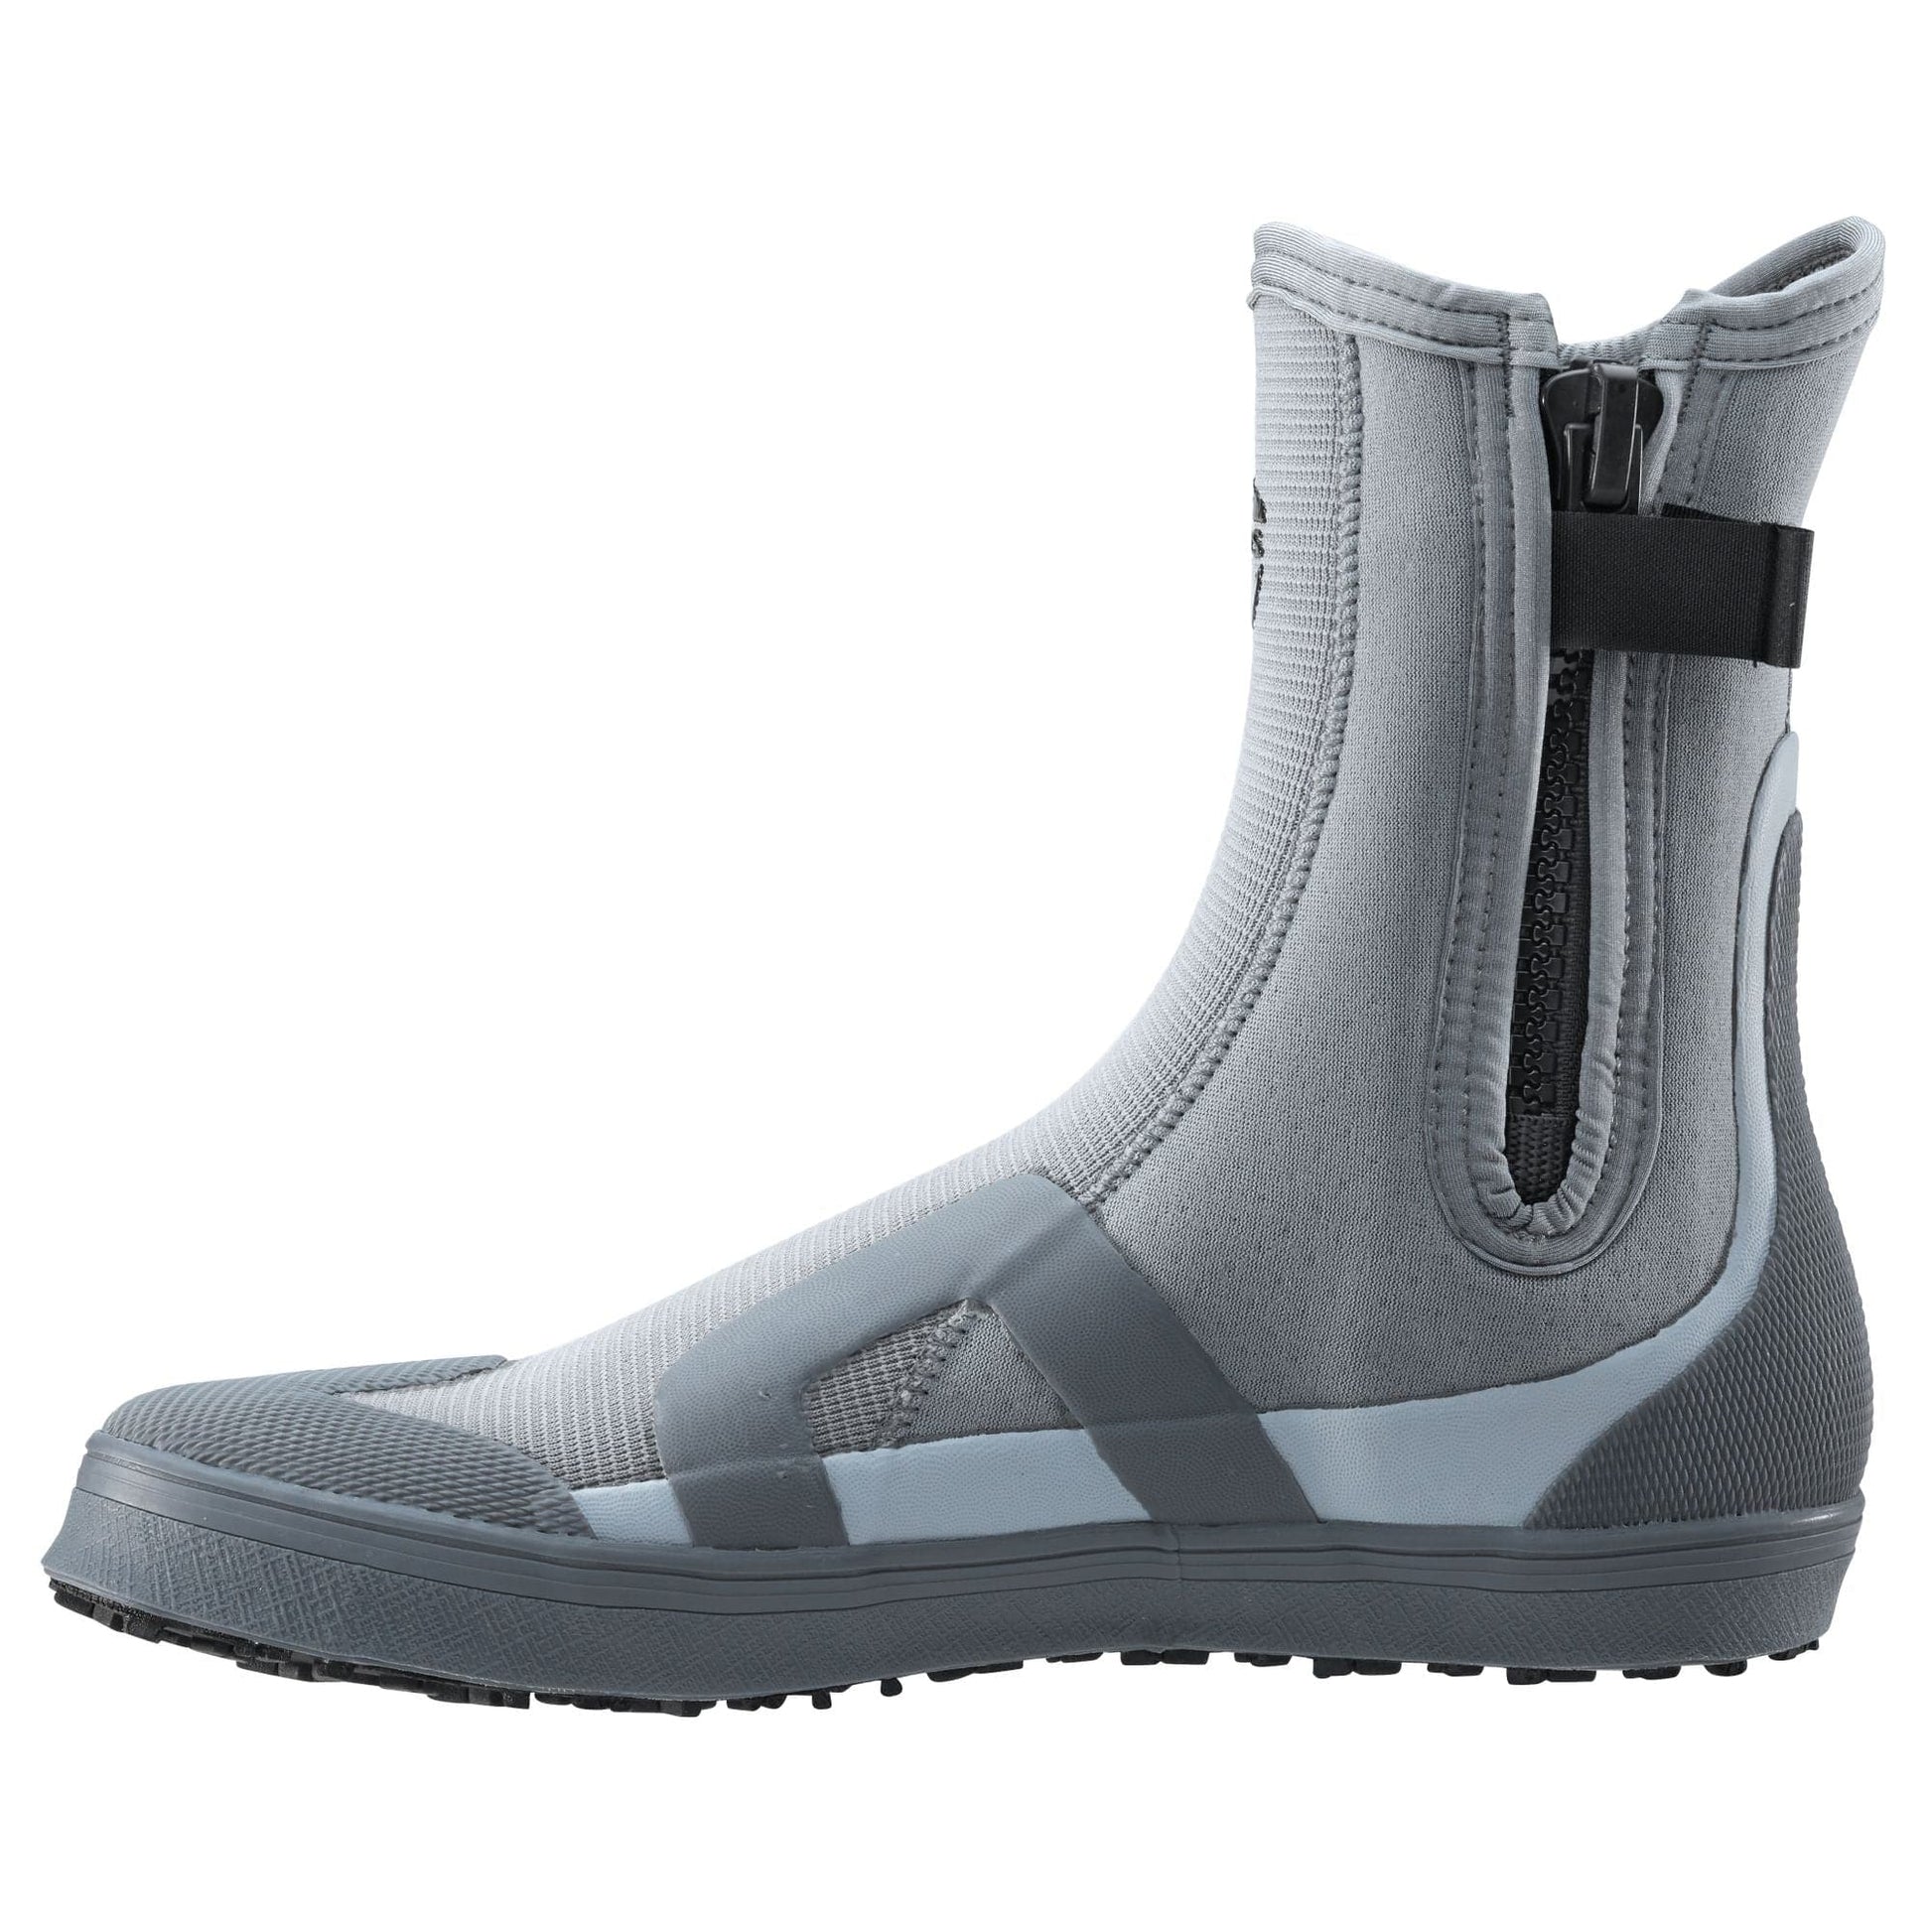 Featuring the Backwater Wetshoe men's footwear, women's footwear manufactured by NRS shown here from a second angle.